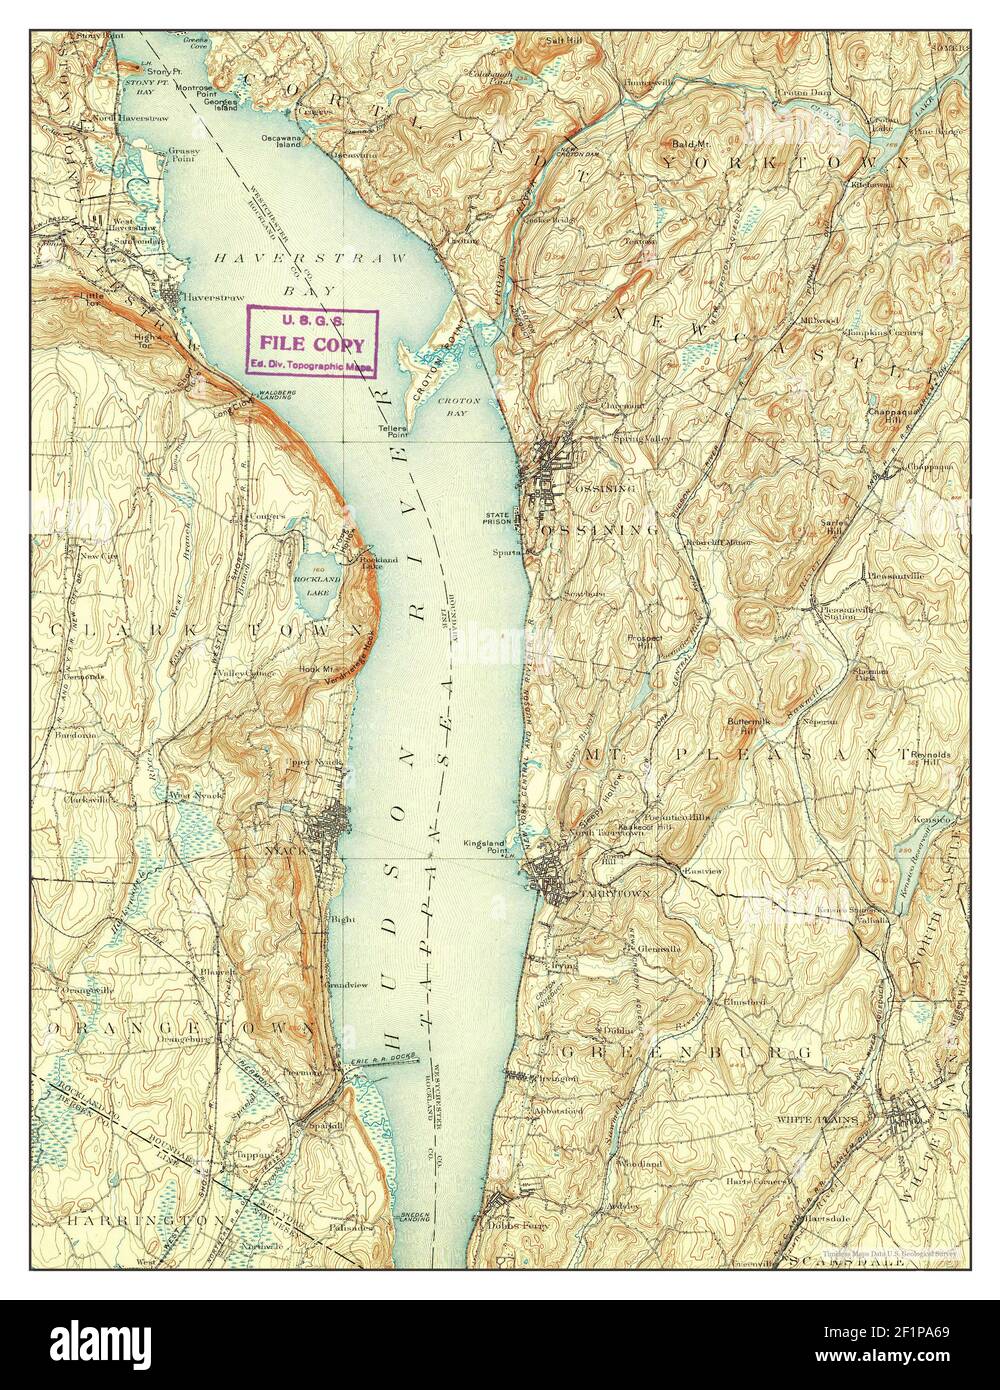 Tarrytown New York map 1902 1:62500 United States of America by